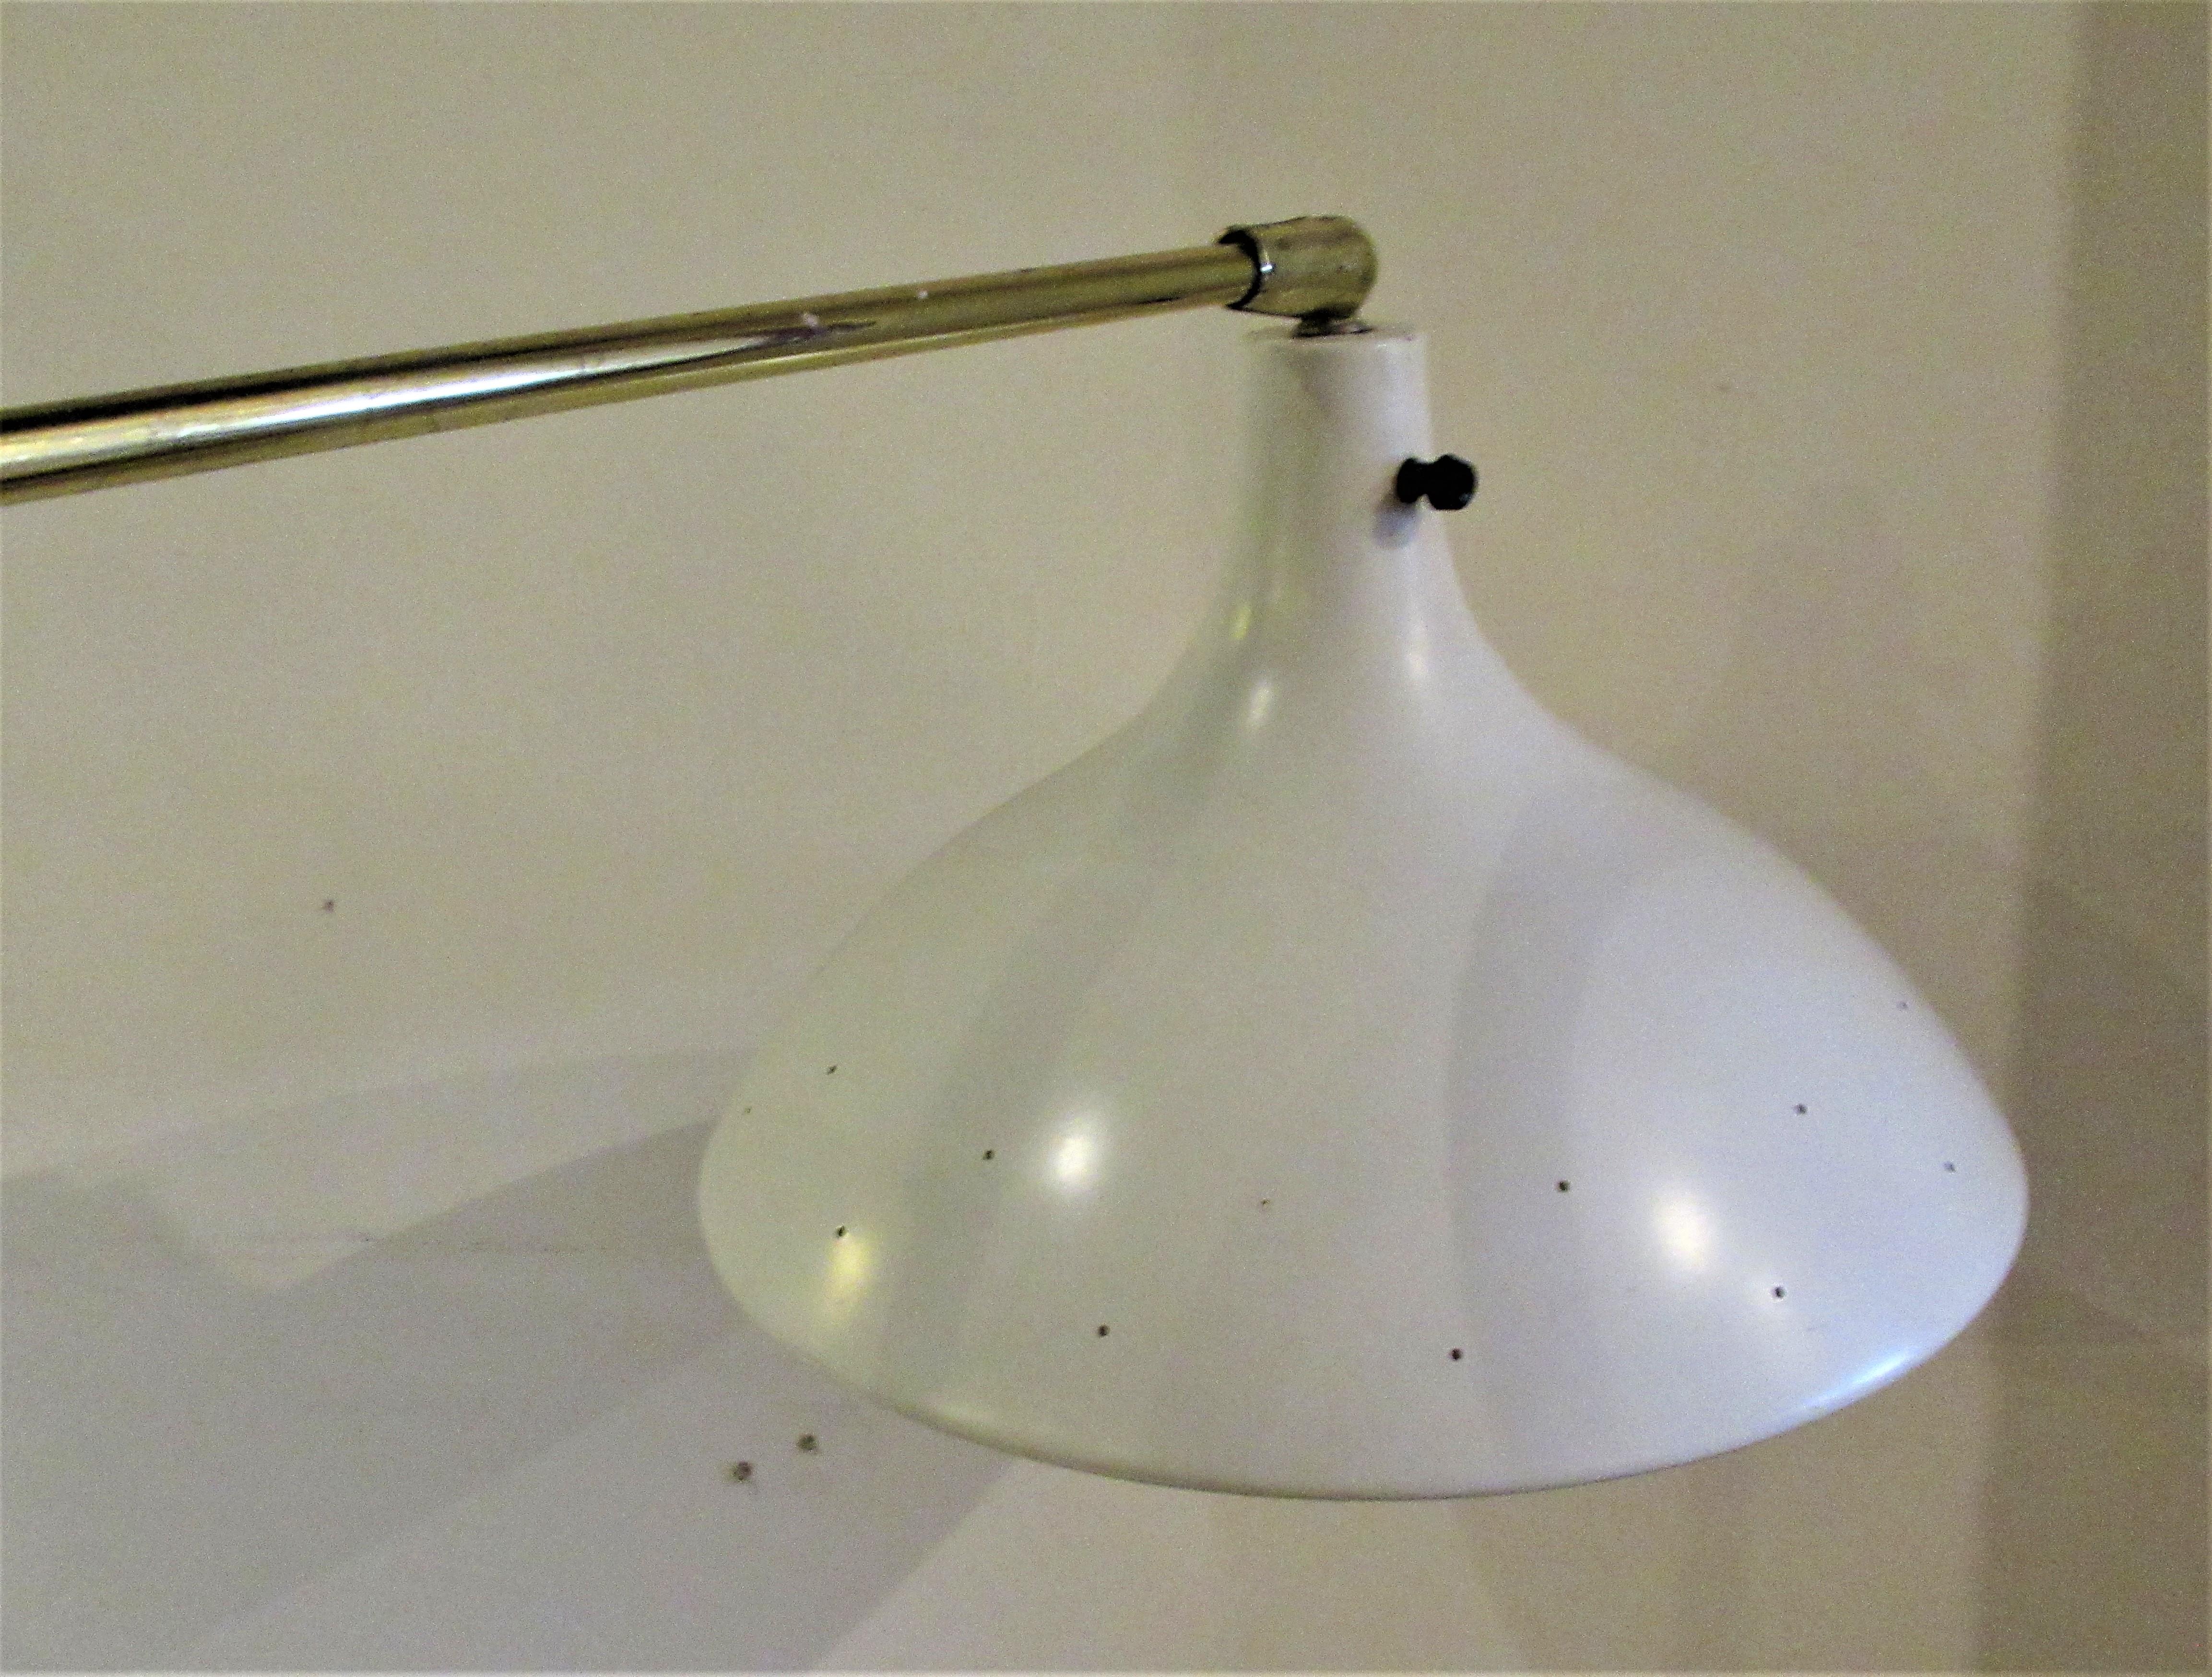 Very sleek modernist bright golden brass floor lamp with pivoting arm and adjustable position original white enamel painted perforated design shade. Attributed to Lightolier, circa 1950-1960. Beautiful lamp - great for reading. See all pictures and